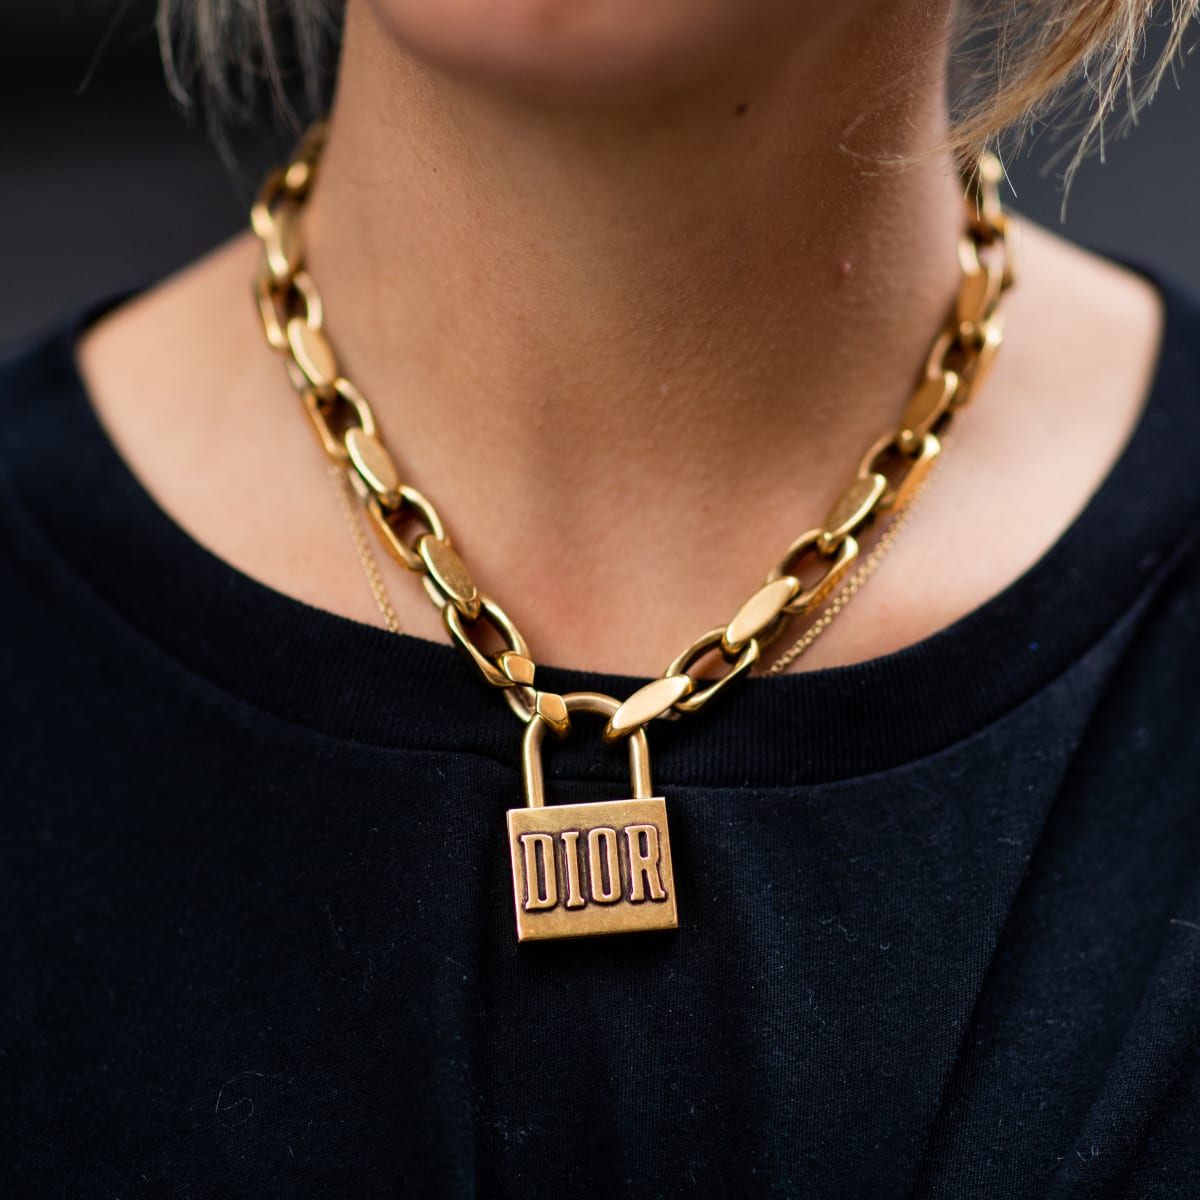 dior necklace with lock